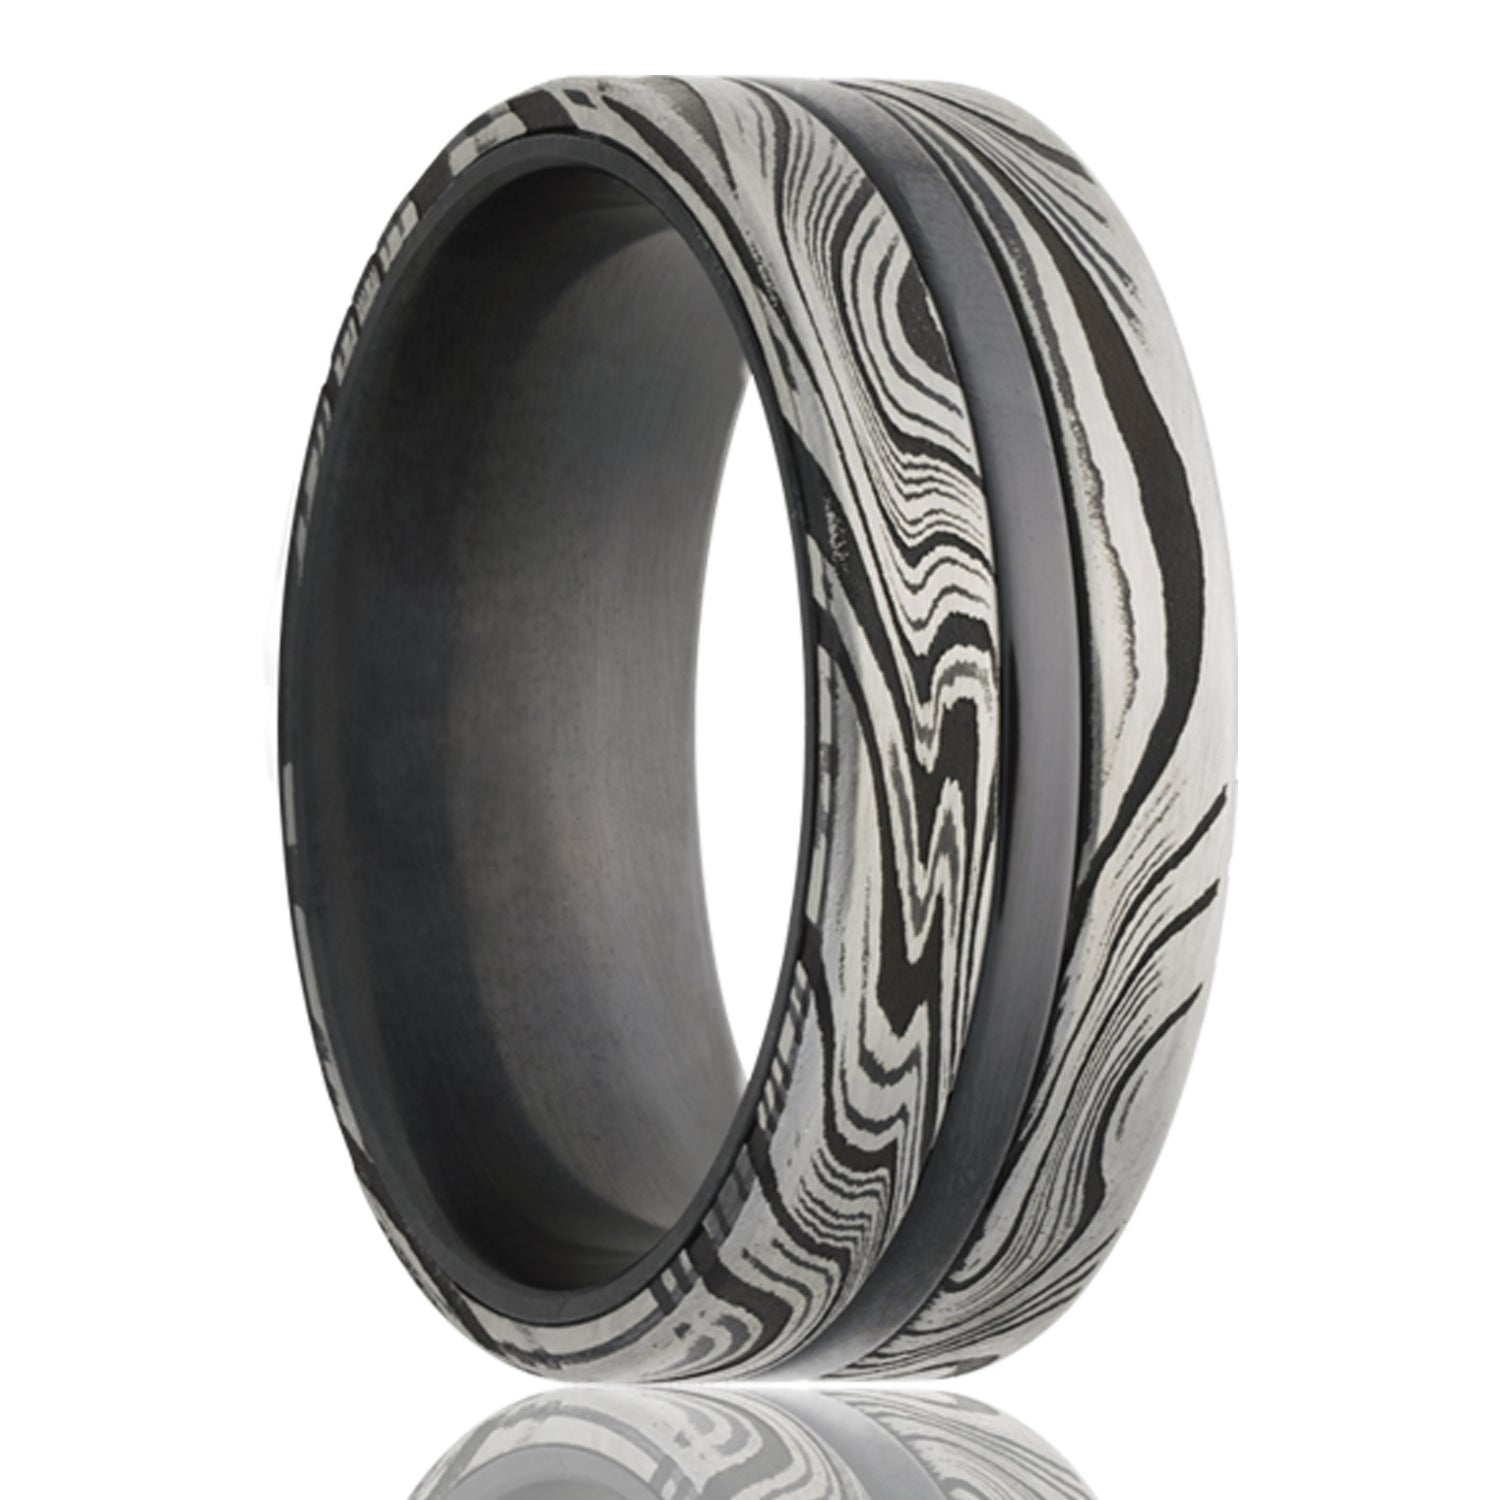 A grooved damascus steel & zirconium men's wedding band displayed on a neutral white background.